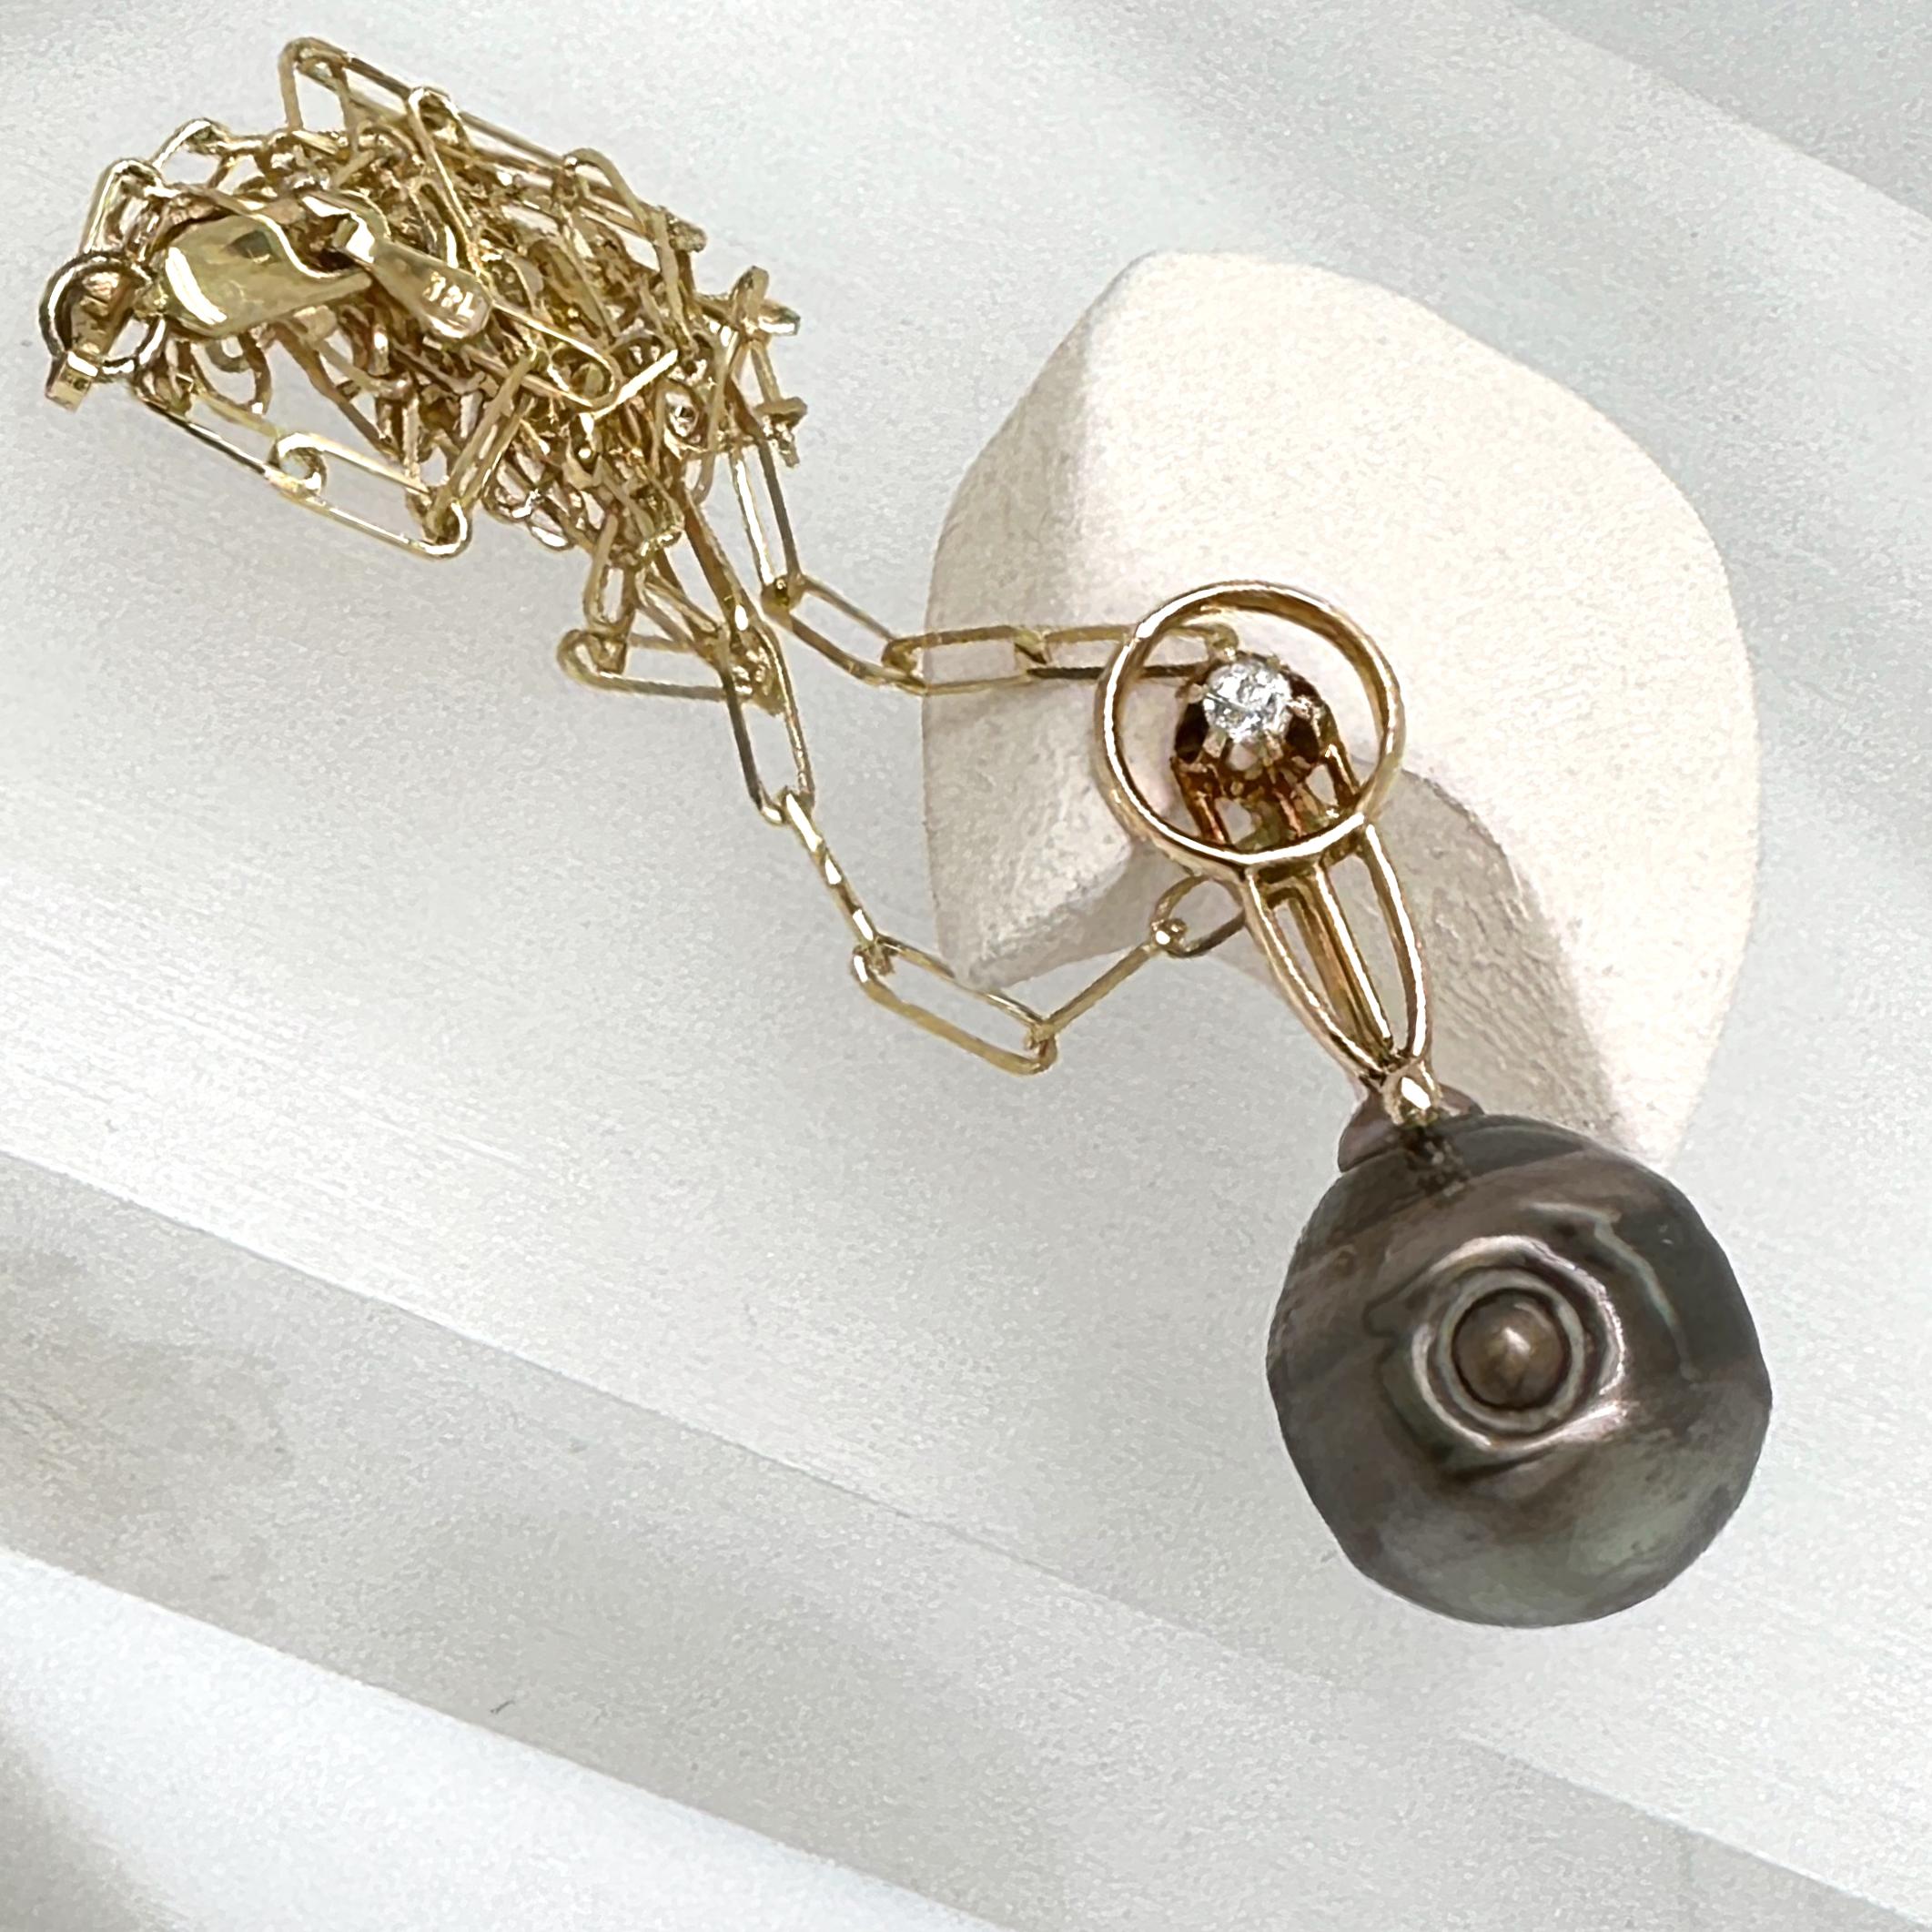 Eytan Brandes used the head of an old stickpin to create the bale for this unique pearl pendant.  The bale mirrors the pearl's goofy center 